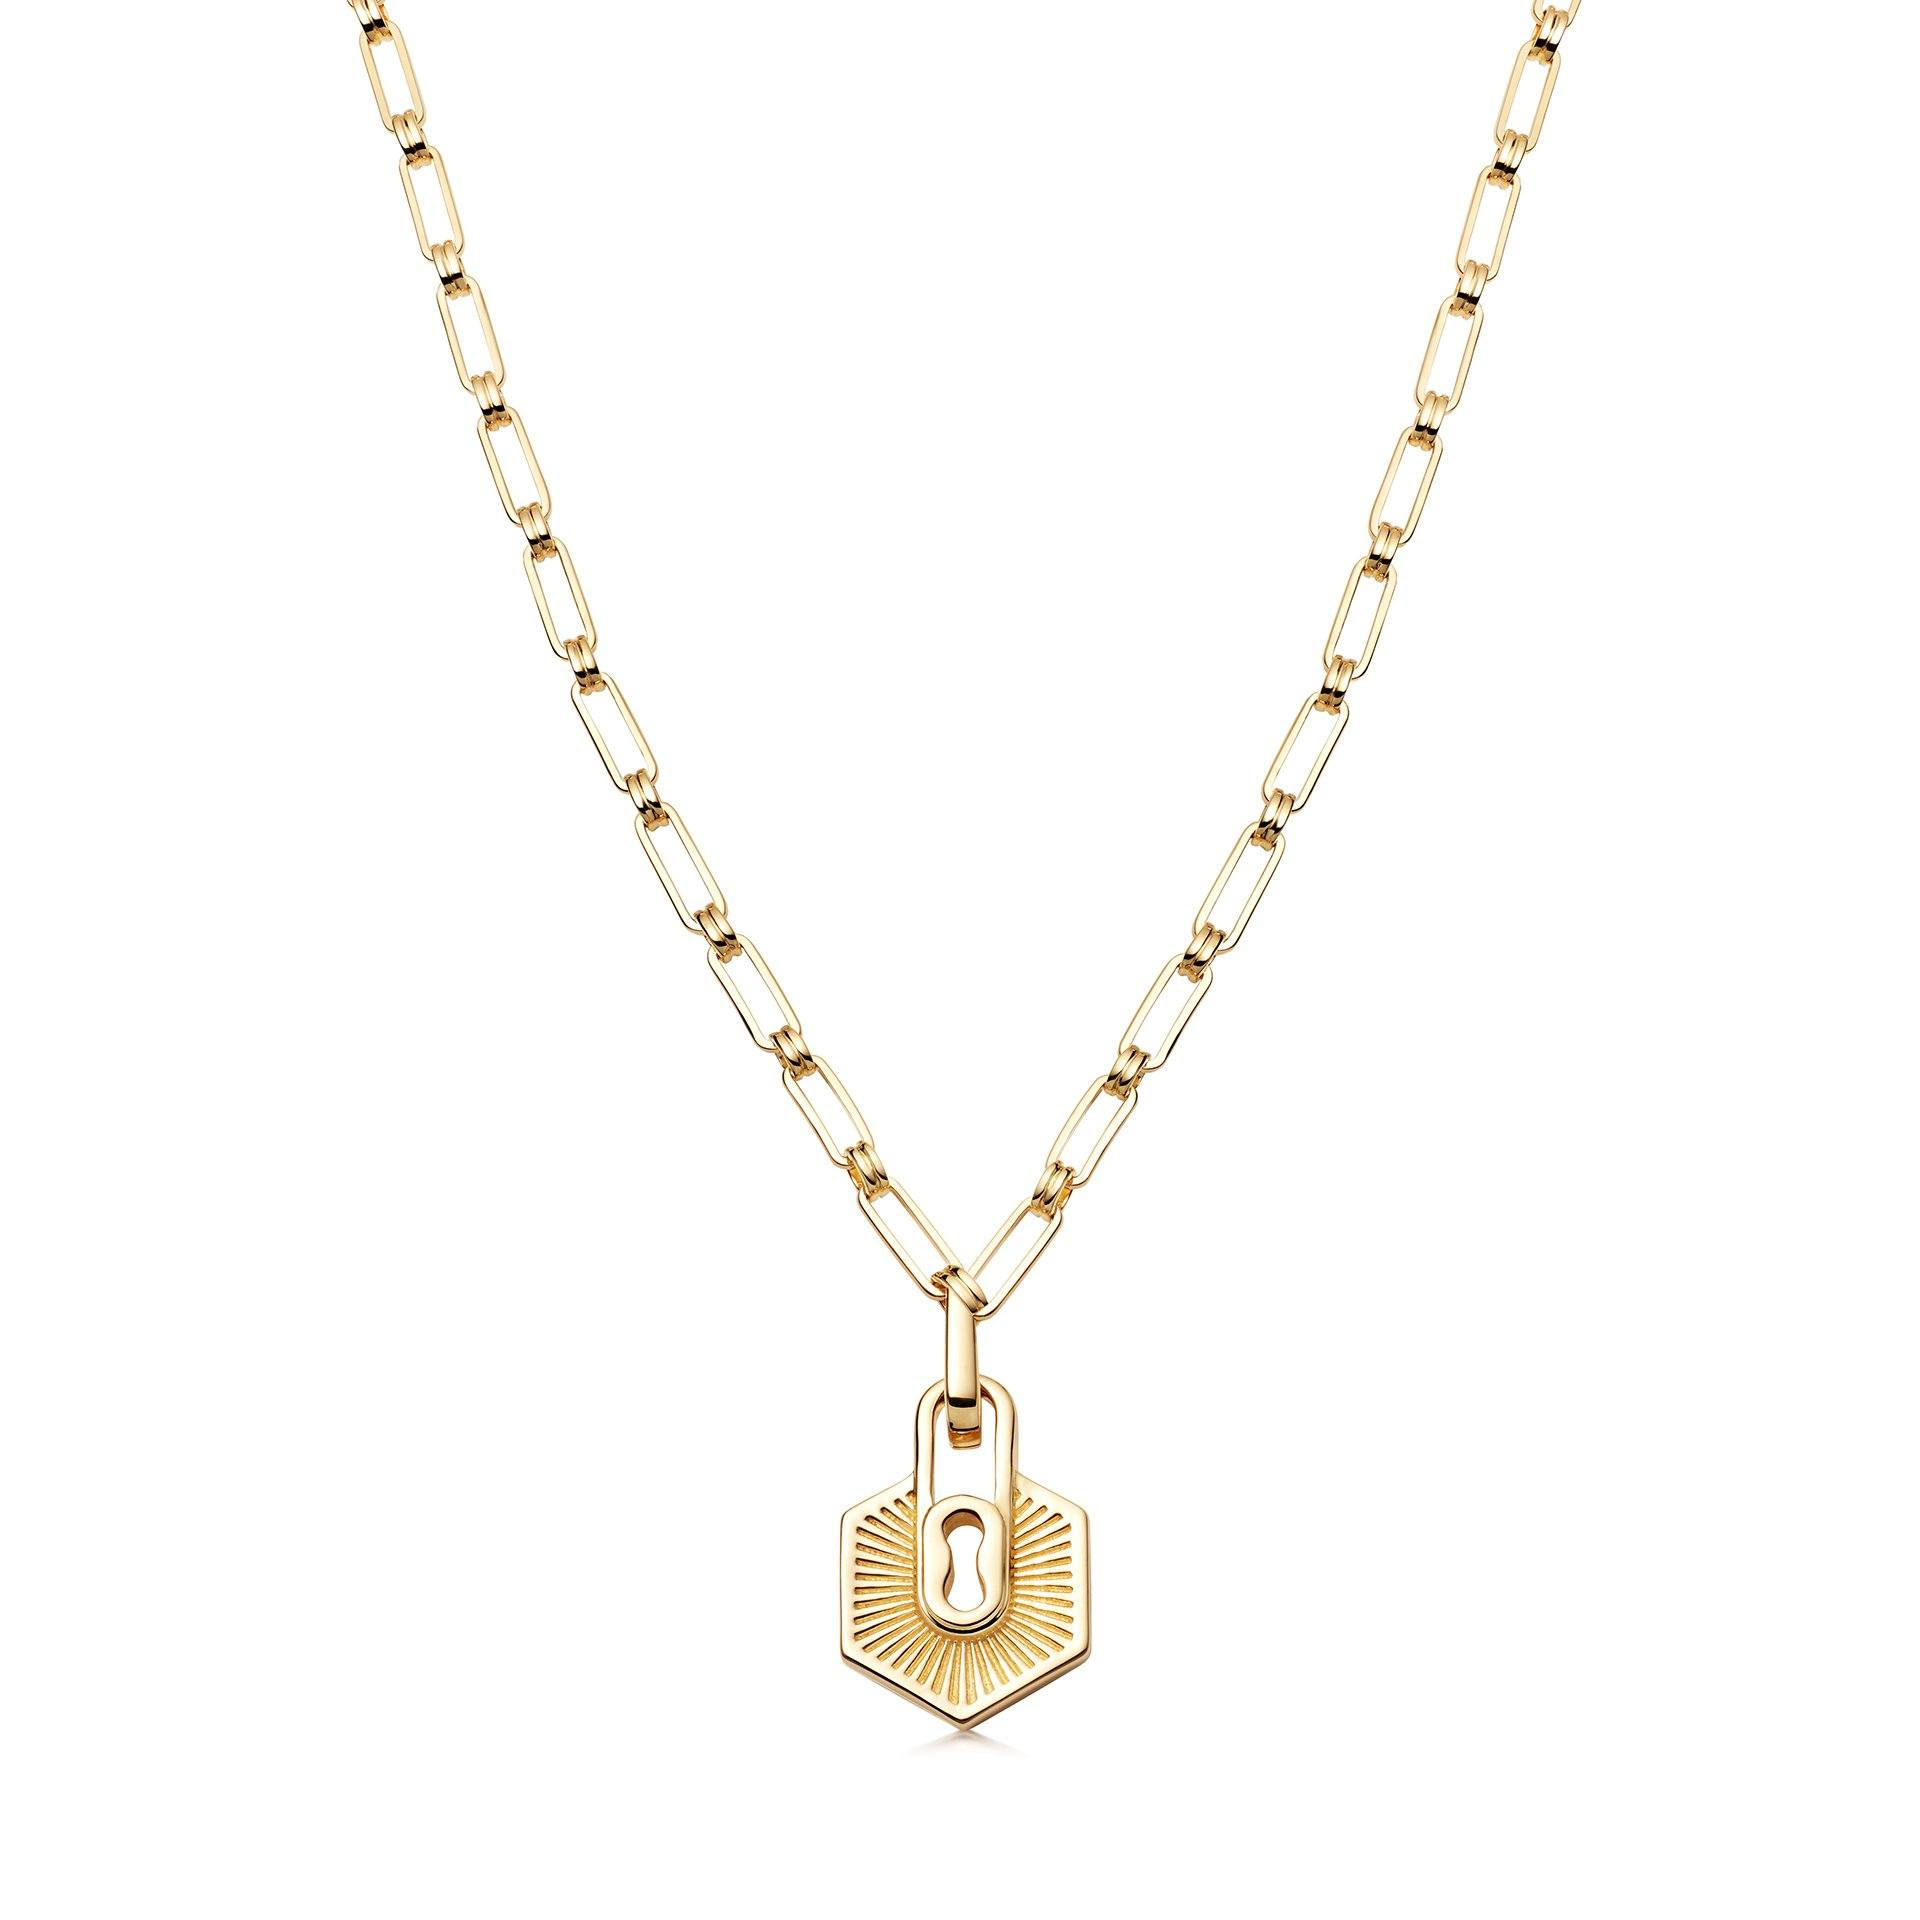 Wholesale offer your ideas and designs Charm and chain 18ct OEM/ODM Jewelry Gold Plated On Brass oem service